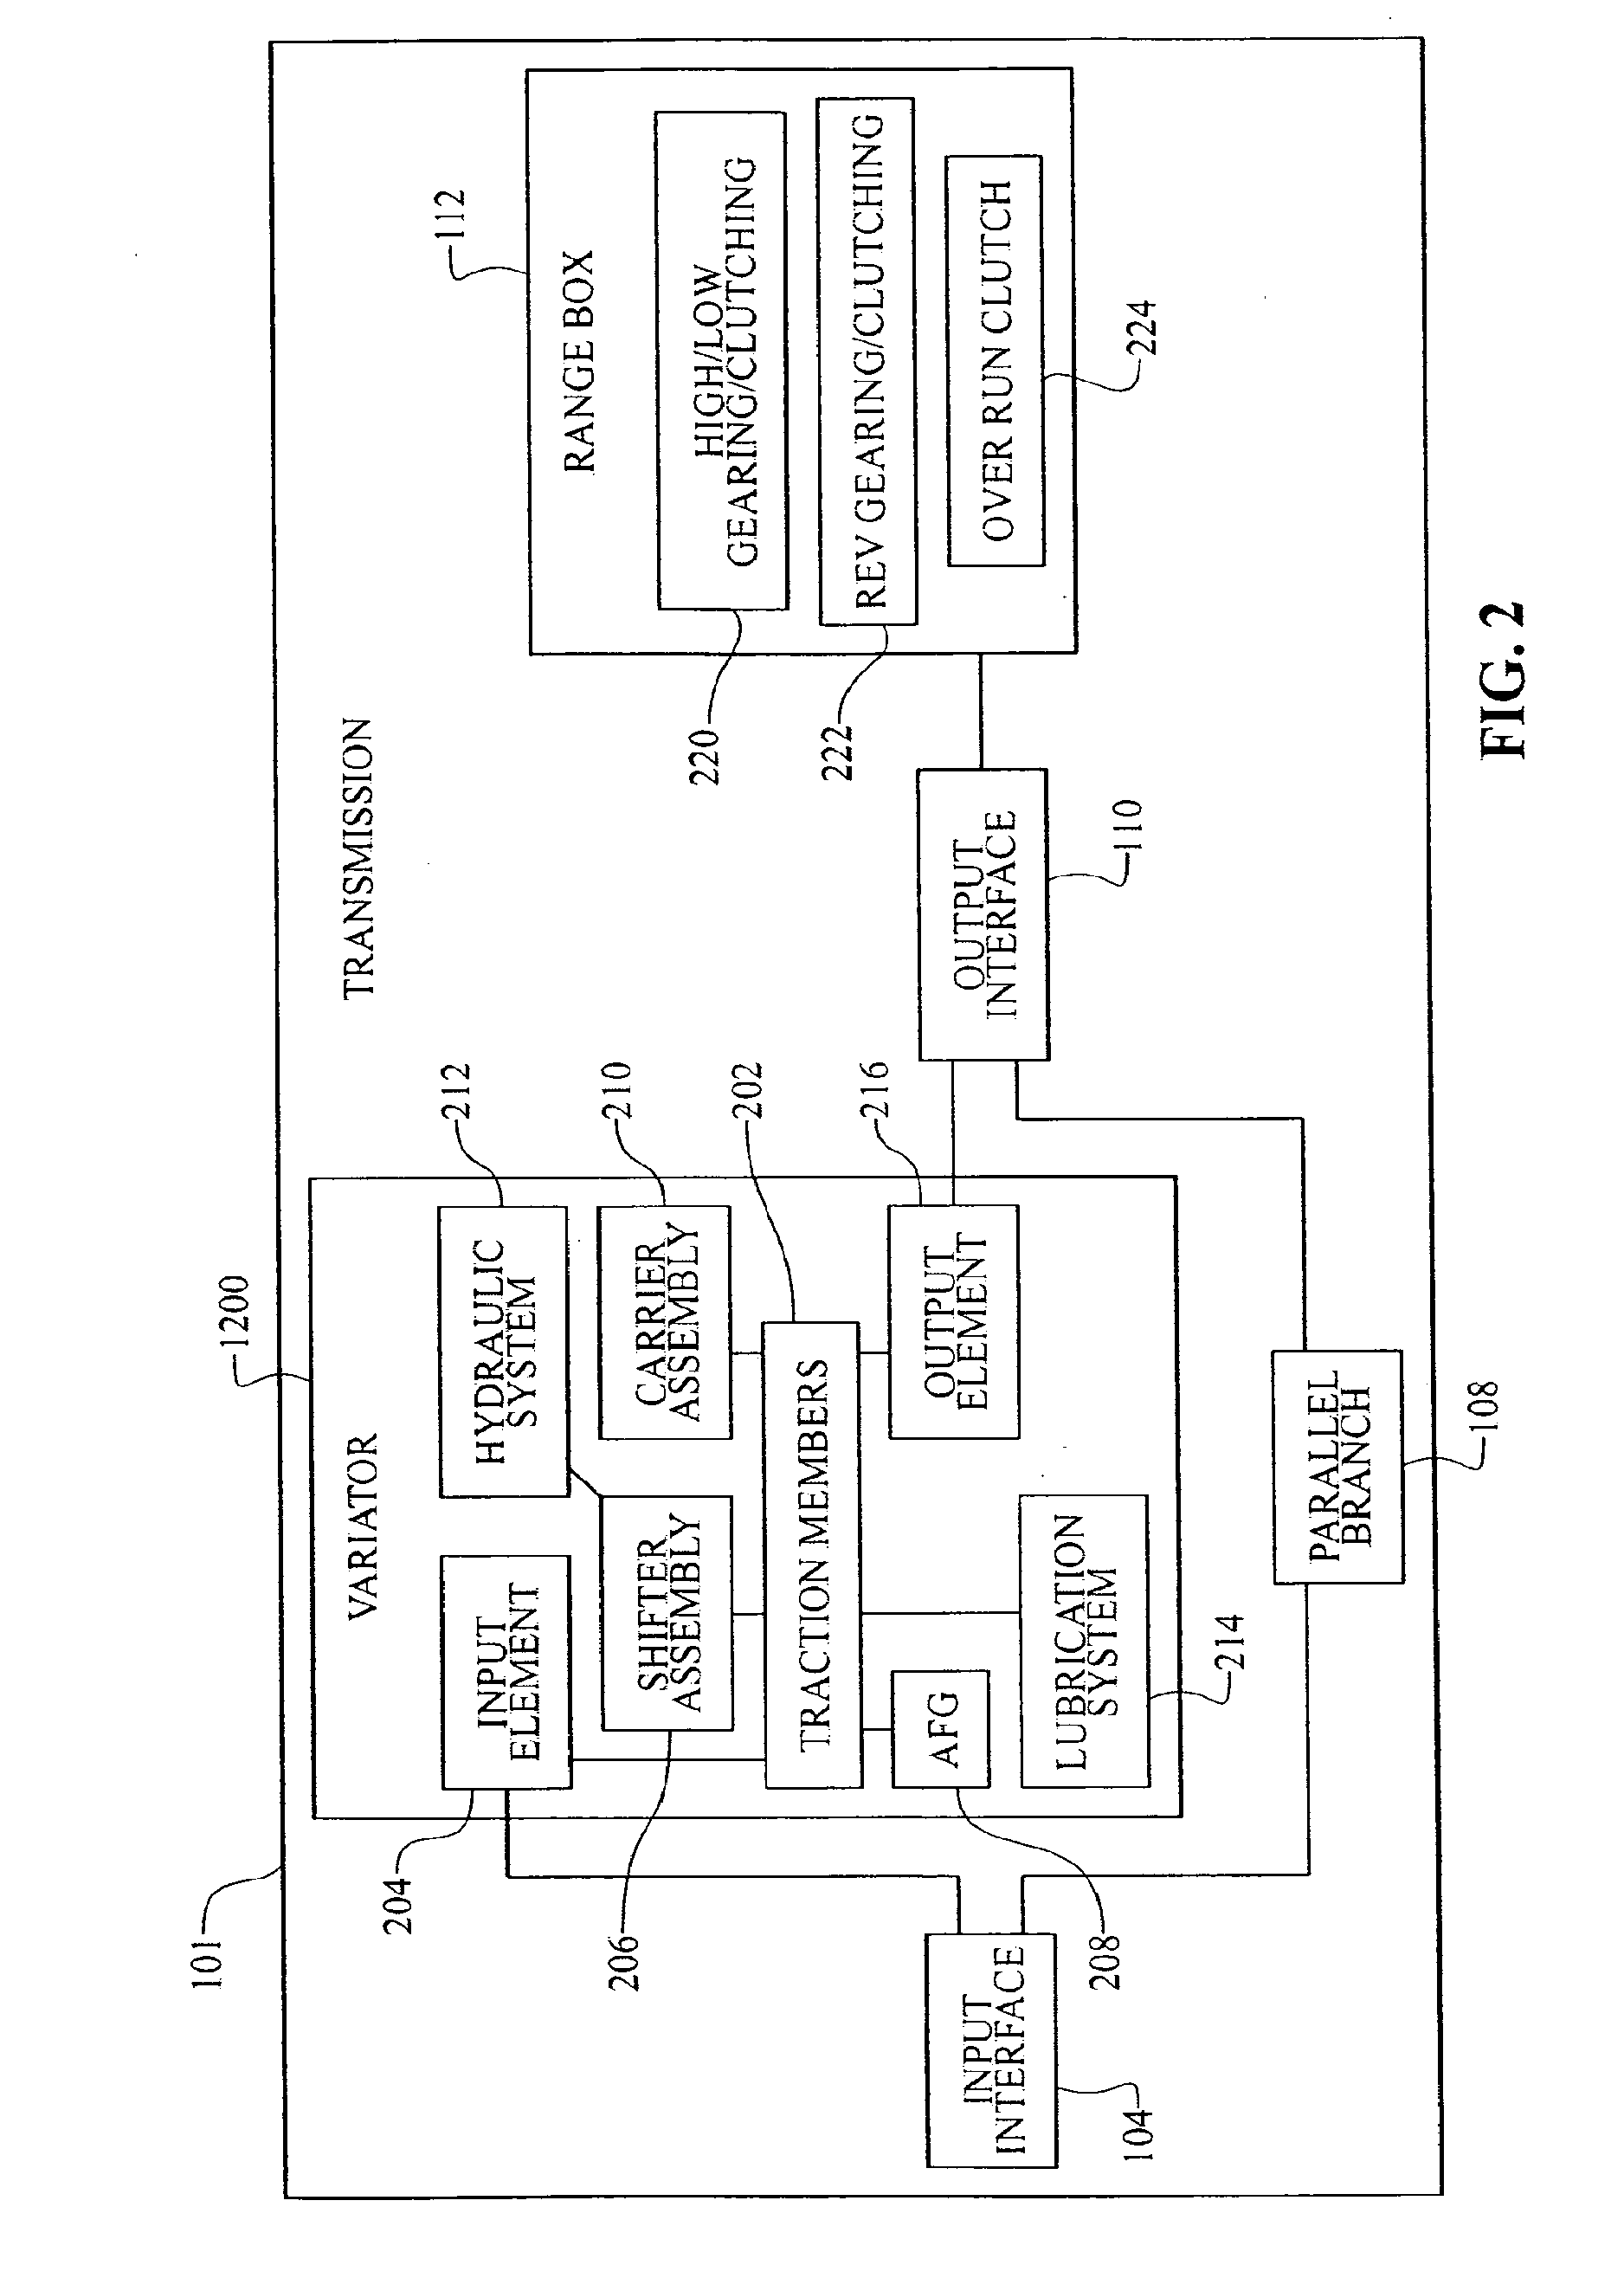 Continuously variable transmissions and methods therefor